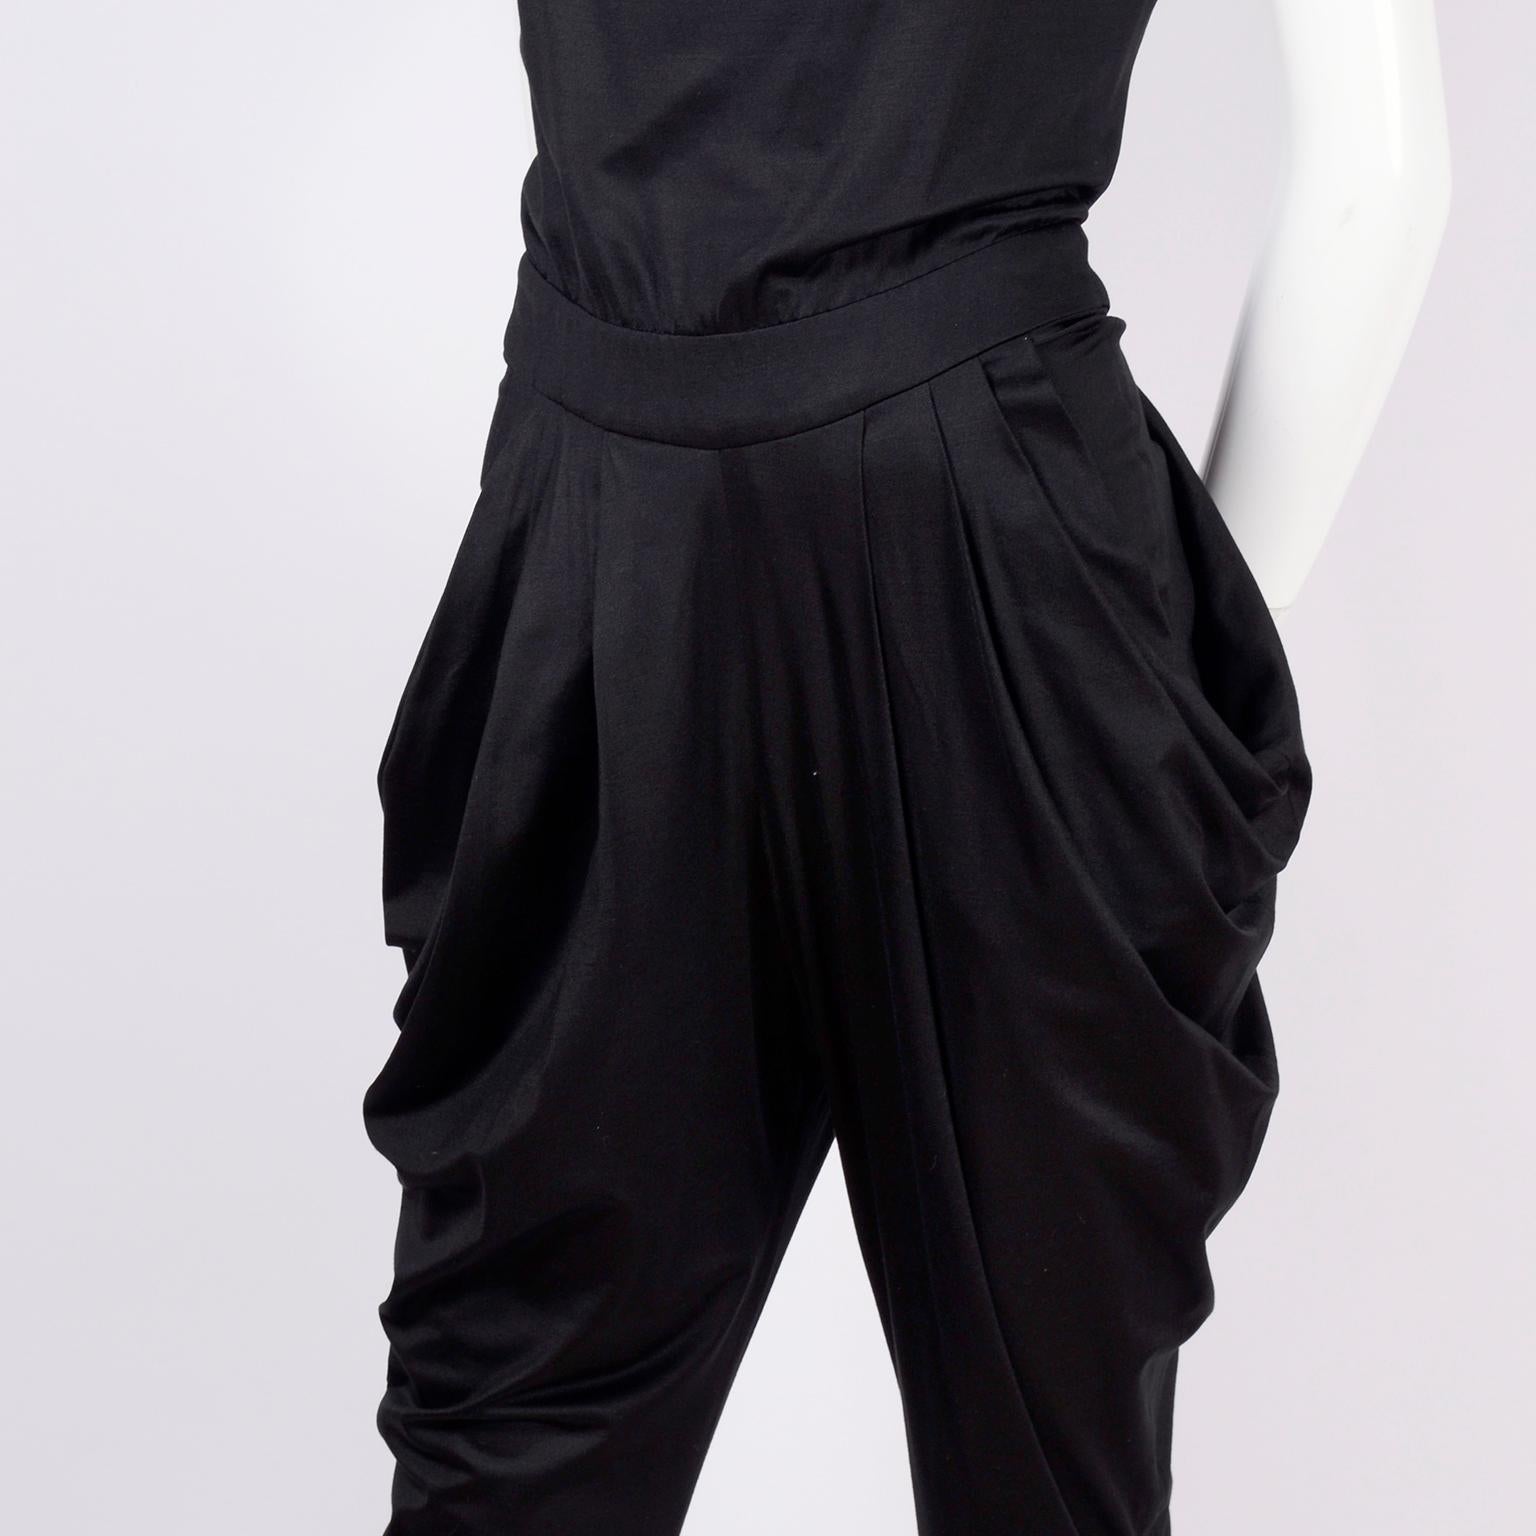 This is a fabulous vintage 1980's black harem style  jumpsuit. This super chic jumpsuit is sleeveless, and zips up the back to the waist, with three buttons above that. The long straps make the bodice create a nice gathering, and the pants have